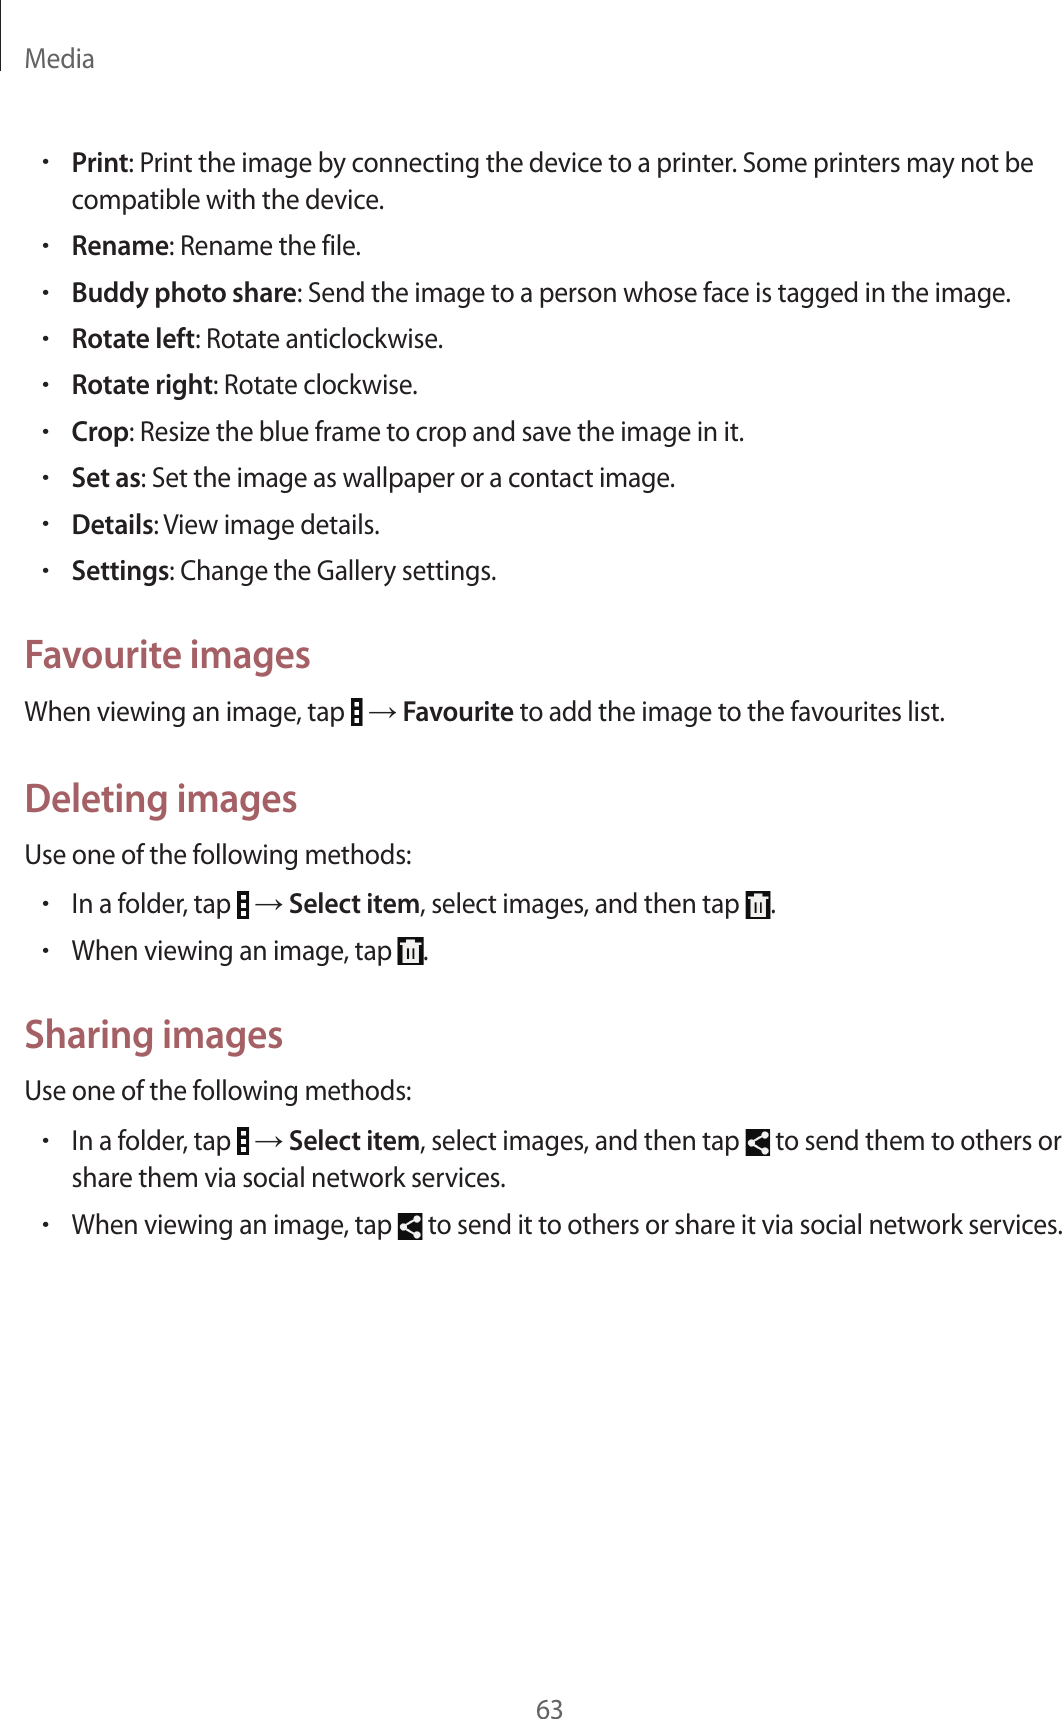 Media63•Print: Print the image by connecting the device to a printer. Some printers may not be compatible with the device.•Rename: Rename the file.•Buddy photo share: Send the image to a person whose face is tagged in the image.•Rotate left: Rotate anticlockwise.•Rotate right: Rotate clockwise.•Crop: Resize the blue frame to crop and save the image in it.•Set as: Set the image as wallpaper or a contact image.•Details: View image details.•Settings: Change the Gallery settings.Favourite imagesWhen viewing an image, tap   → Favourite to add the image to the favourites list.Deleting imagesUse one of the following methods:•In a folder, tap   → Select item, select images, and then tap  .•When viewing an image, tap  .Sharing imagesUse one of the following methods:•In a folder, tap   → Select item, select images, and then tap   to send them to others or share them via social network services.•When viewing an image, tap   to send it to others or share it via social network services.